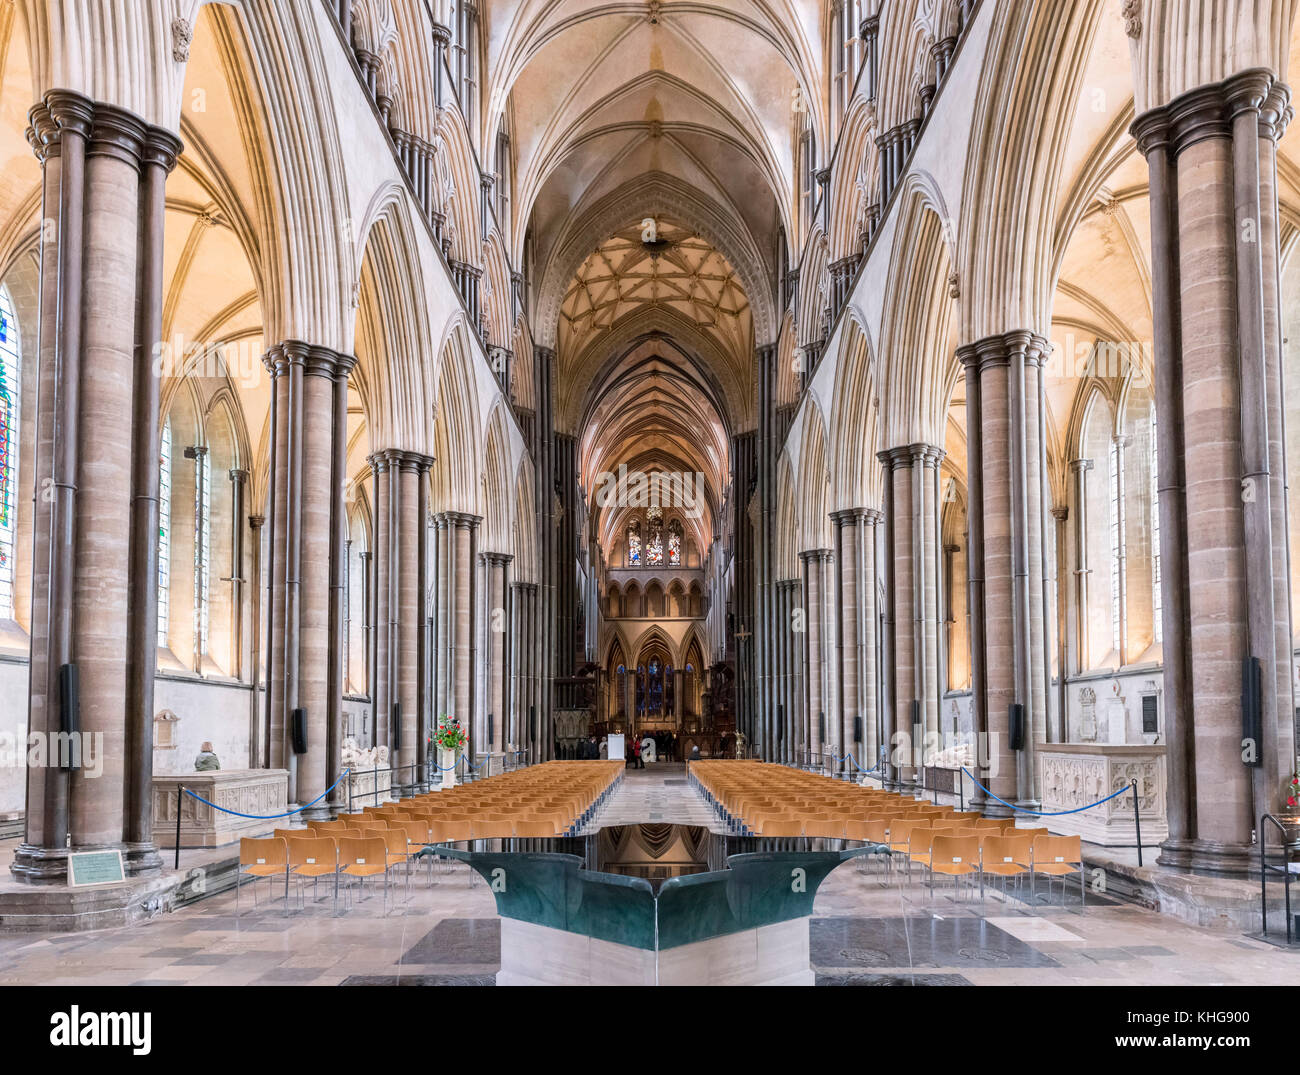 Nave of Salisbury Cathedral with the baptismal font in the foreground, Salisbury, Wiltshire, England, UK Stock Photo